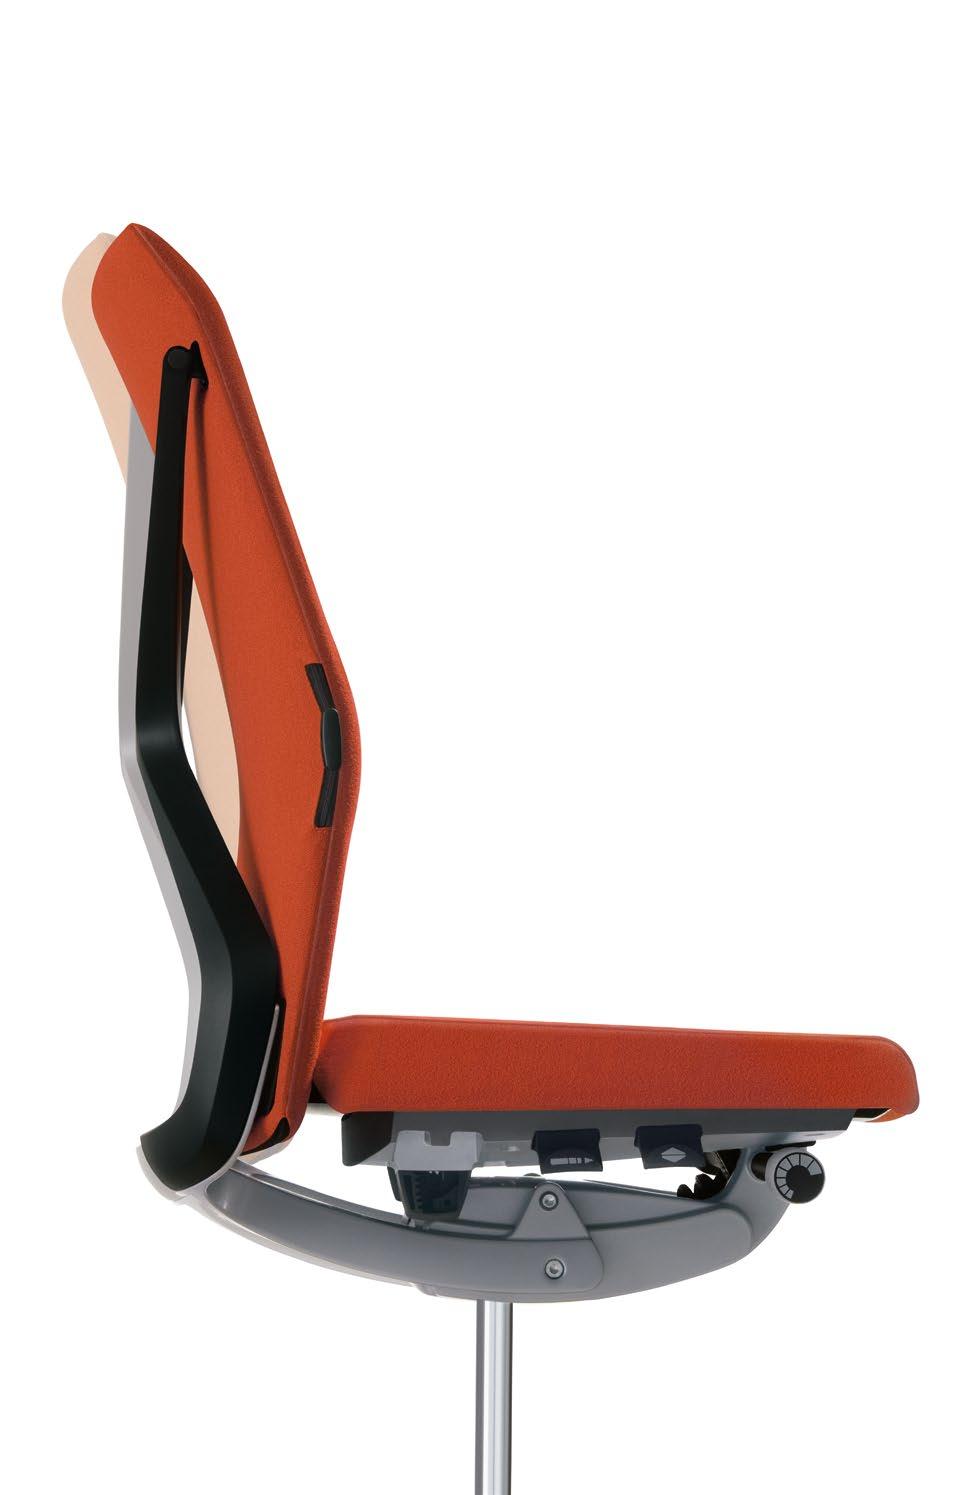 Flexible support. The backrest with support structure and the mobile, flexible upholstery support the back in every move. The iliac crest region is perfectly supported in all working positions.